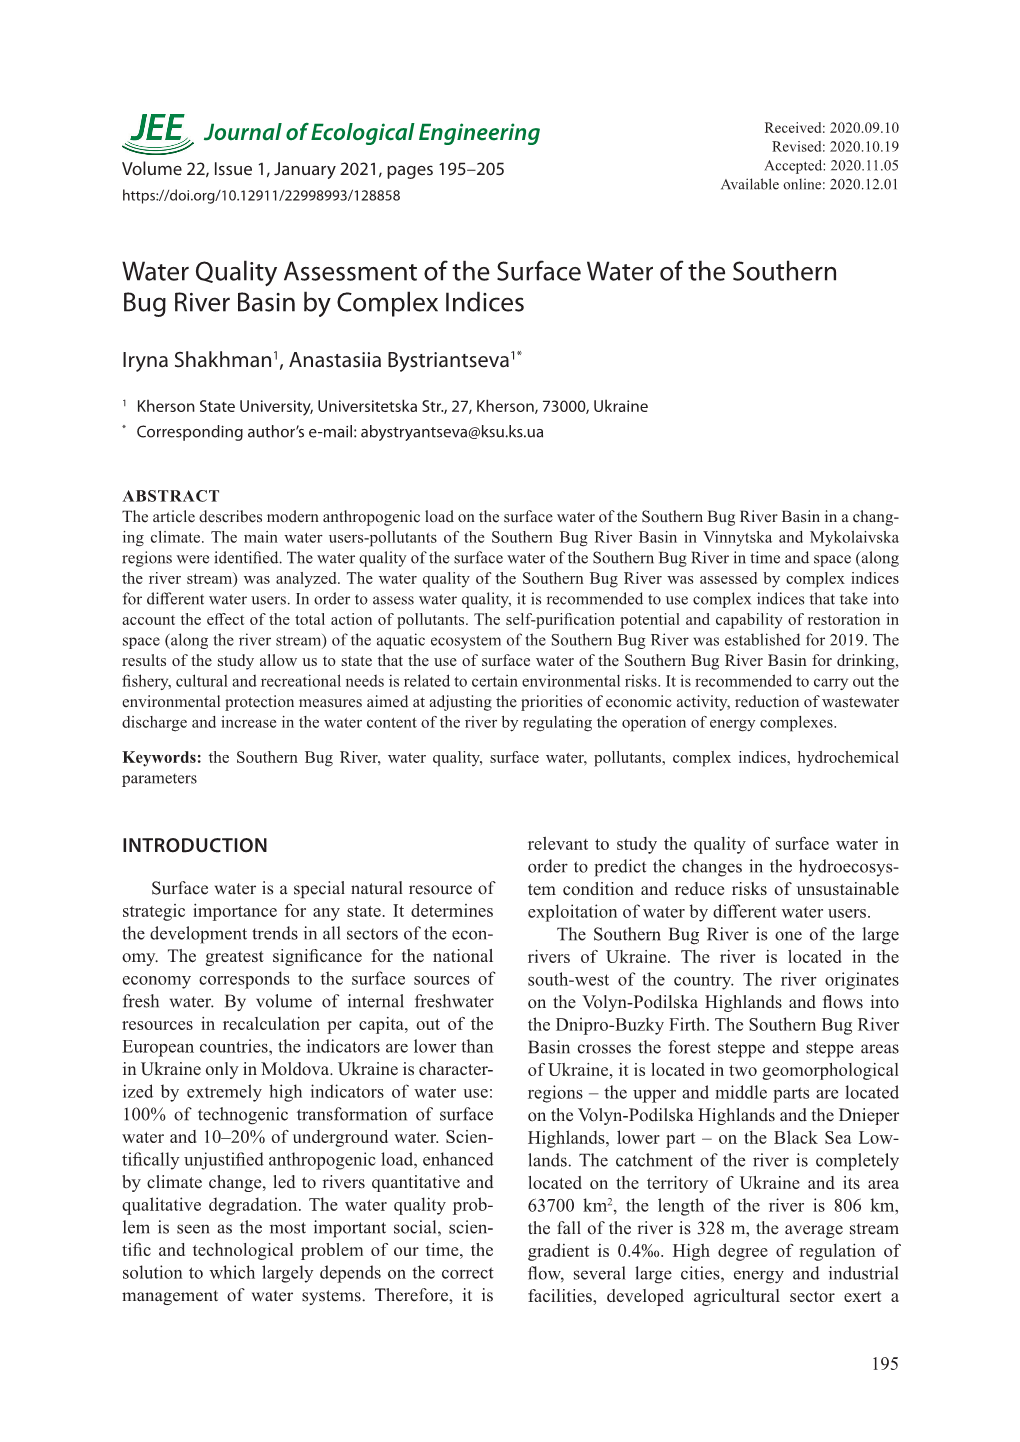 Water Quality Assessment of the Surface Water of the Southern Bug River Basin by Complex Indices